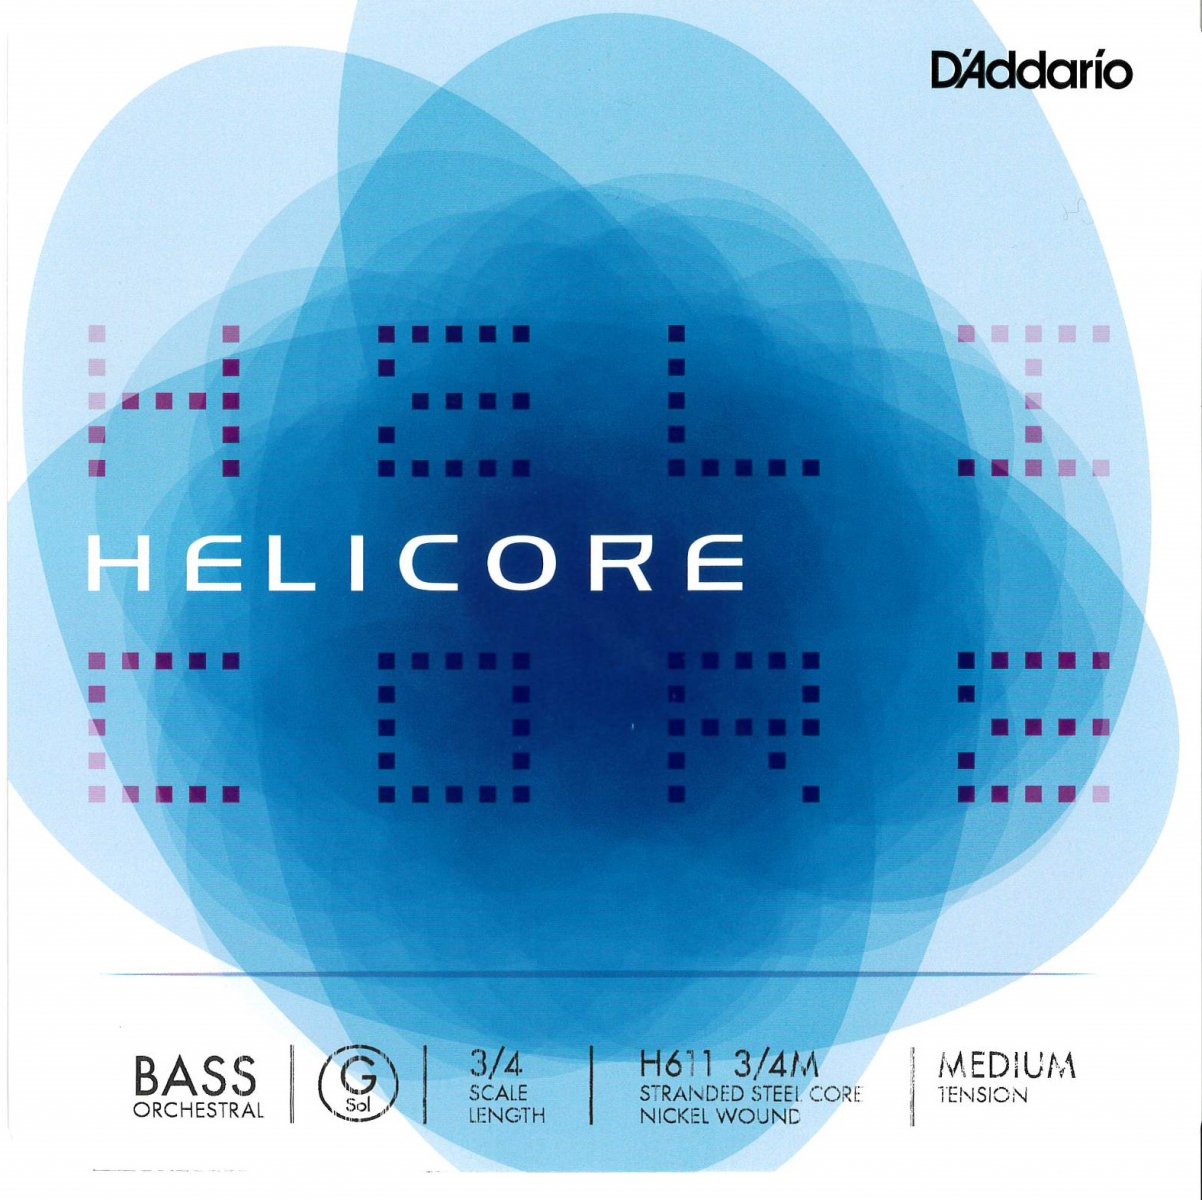 Helicore Orchestra】ﾍﾘｺｱｵｰｹｽﾄﾗ-D'addario- - I Love Strings. | 国内 